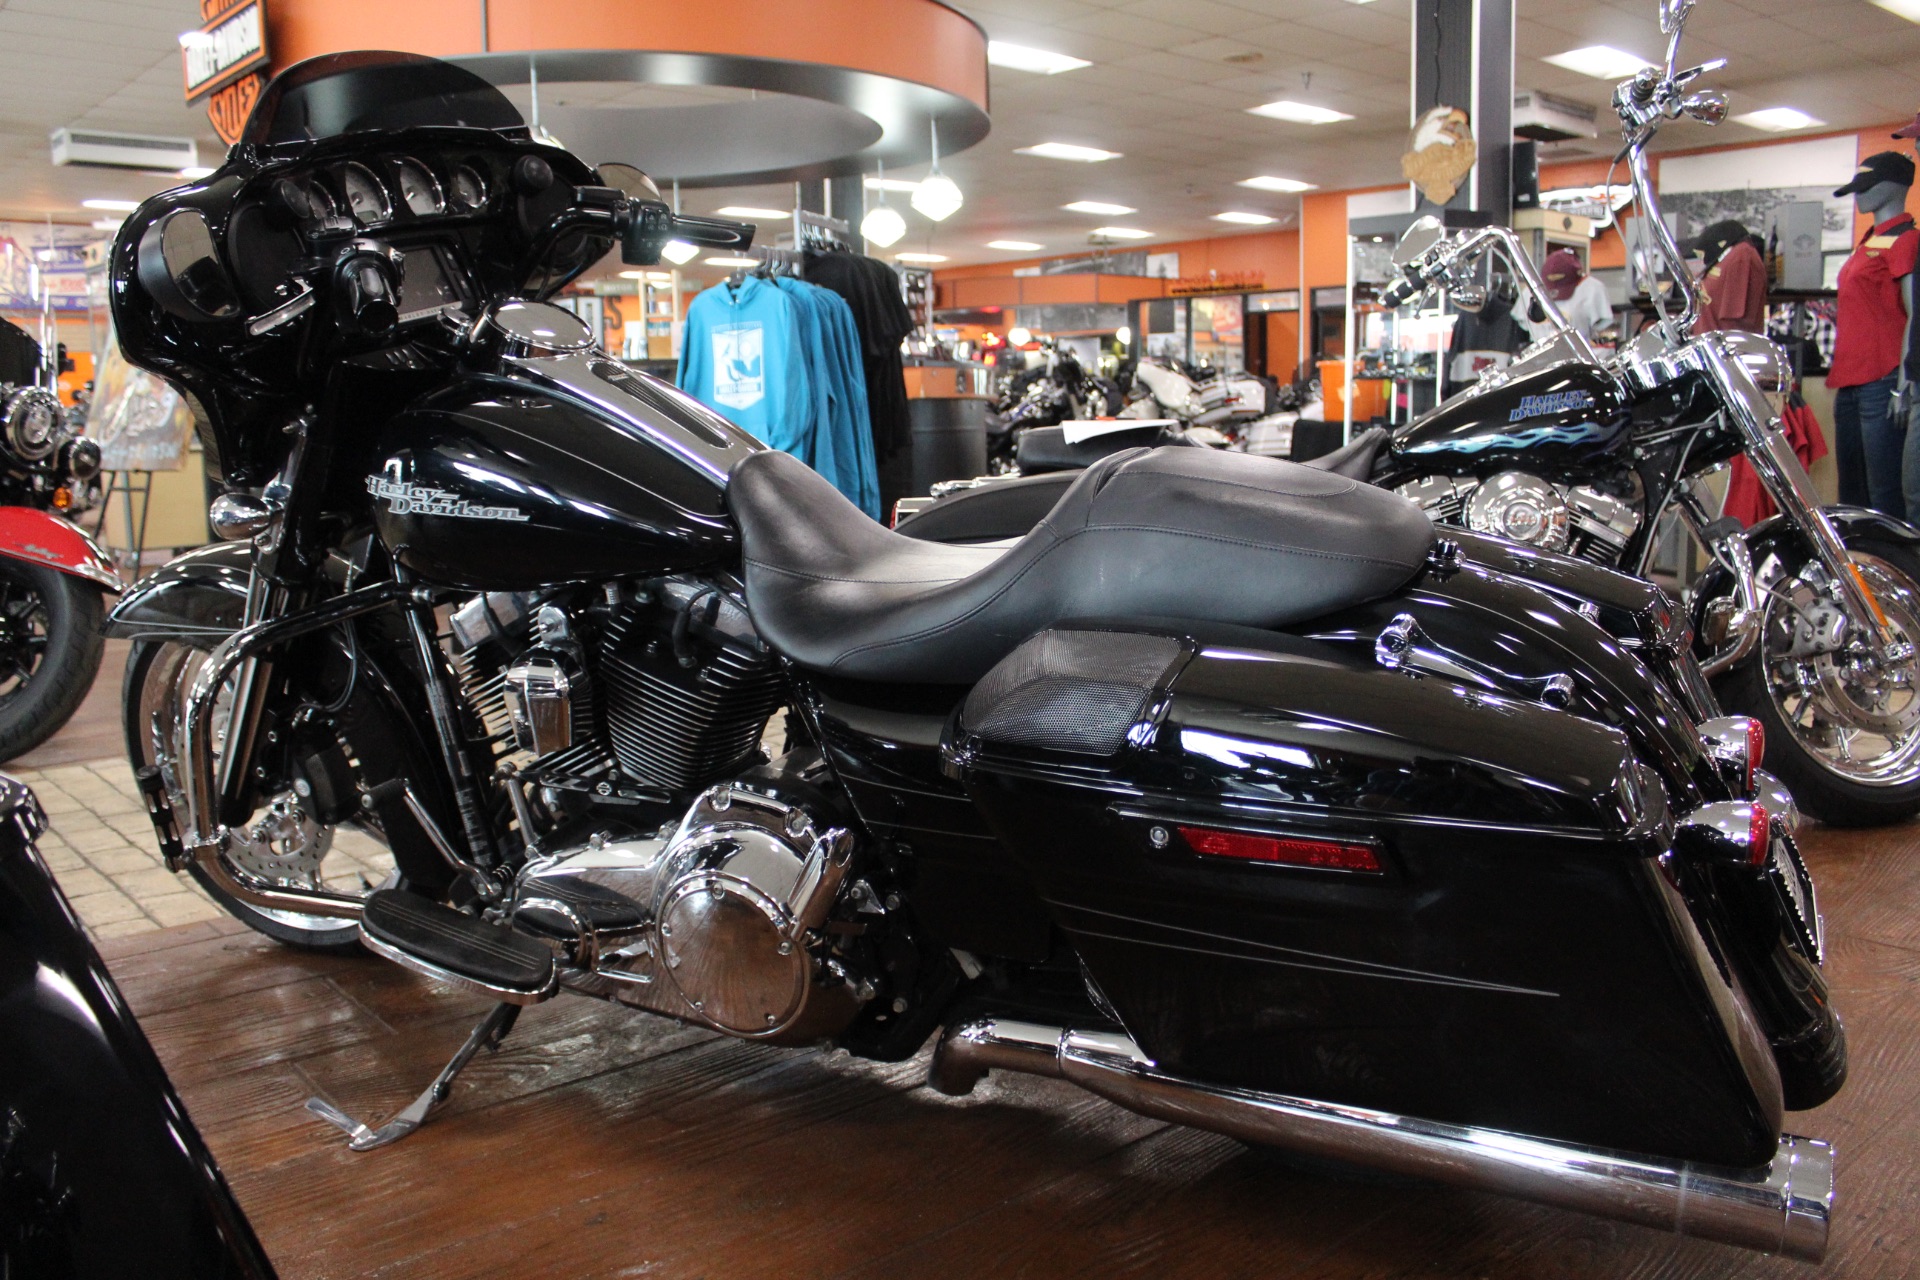 2015 Harley-Davidson Street Glide® Special in Marion, Illinois - Photo 4